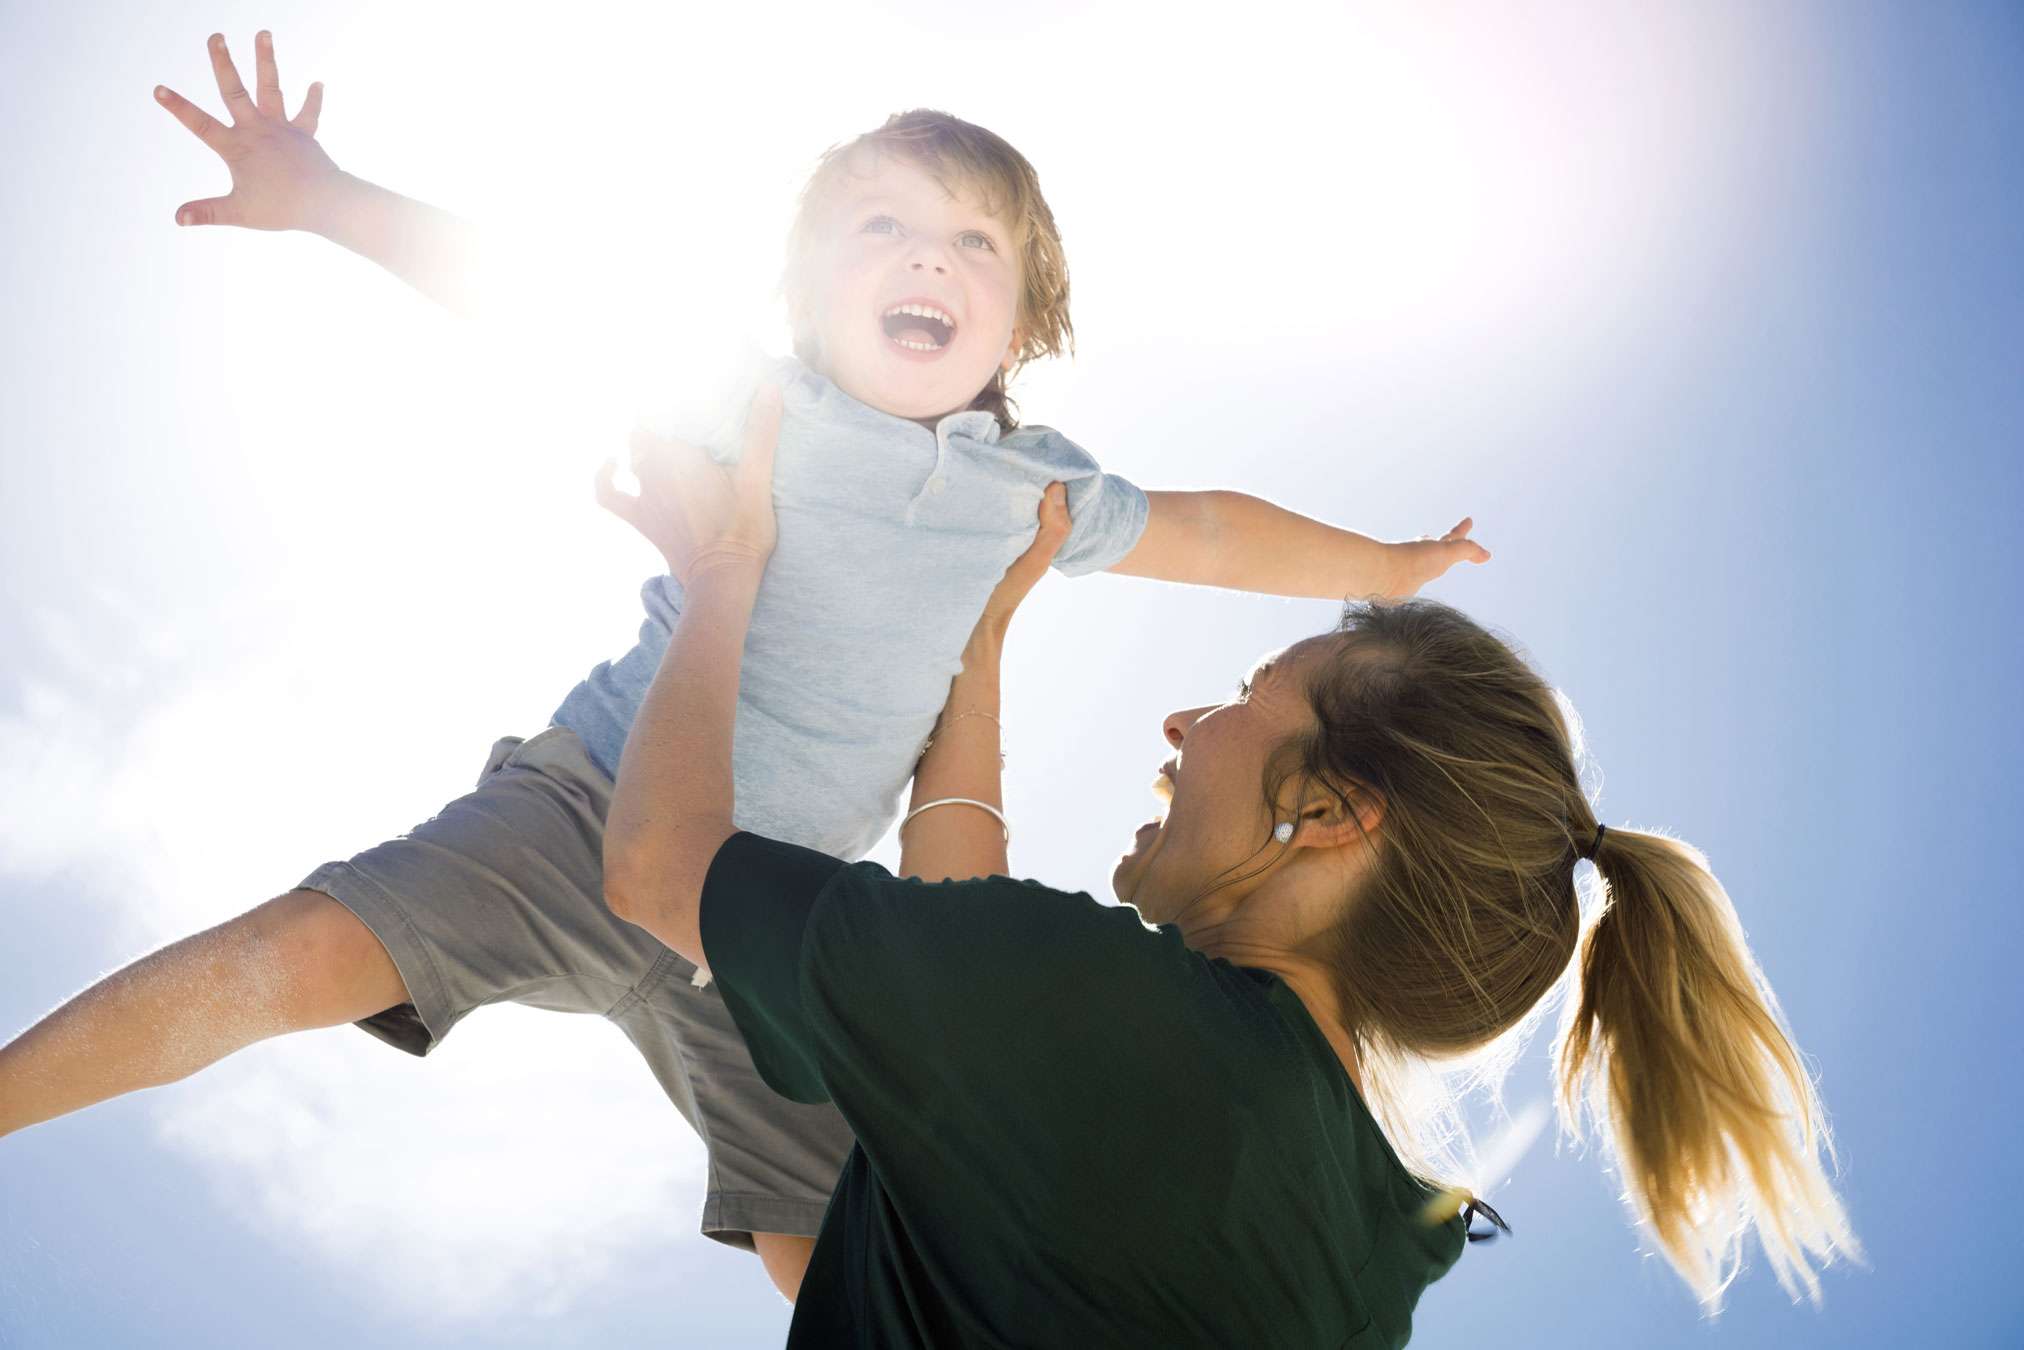 Color photo of woman holding up a 5 year old laughing boy against a blue sunny sky. He is wearing a light blue shirt and gray pants and has he arms out stretched as if he's flying. She is wearing a dark t-shirt and has a blonde ponytail. She is laughing.